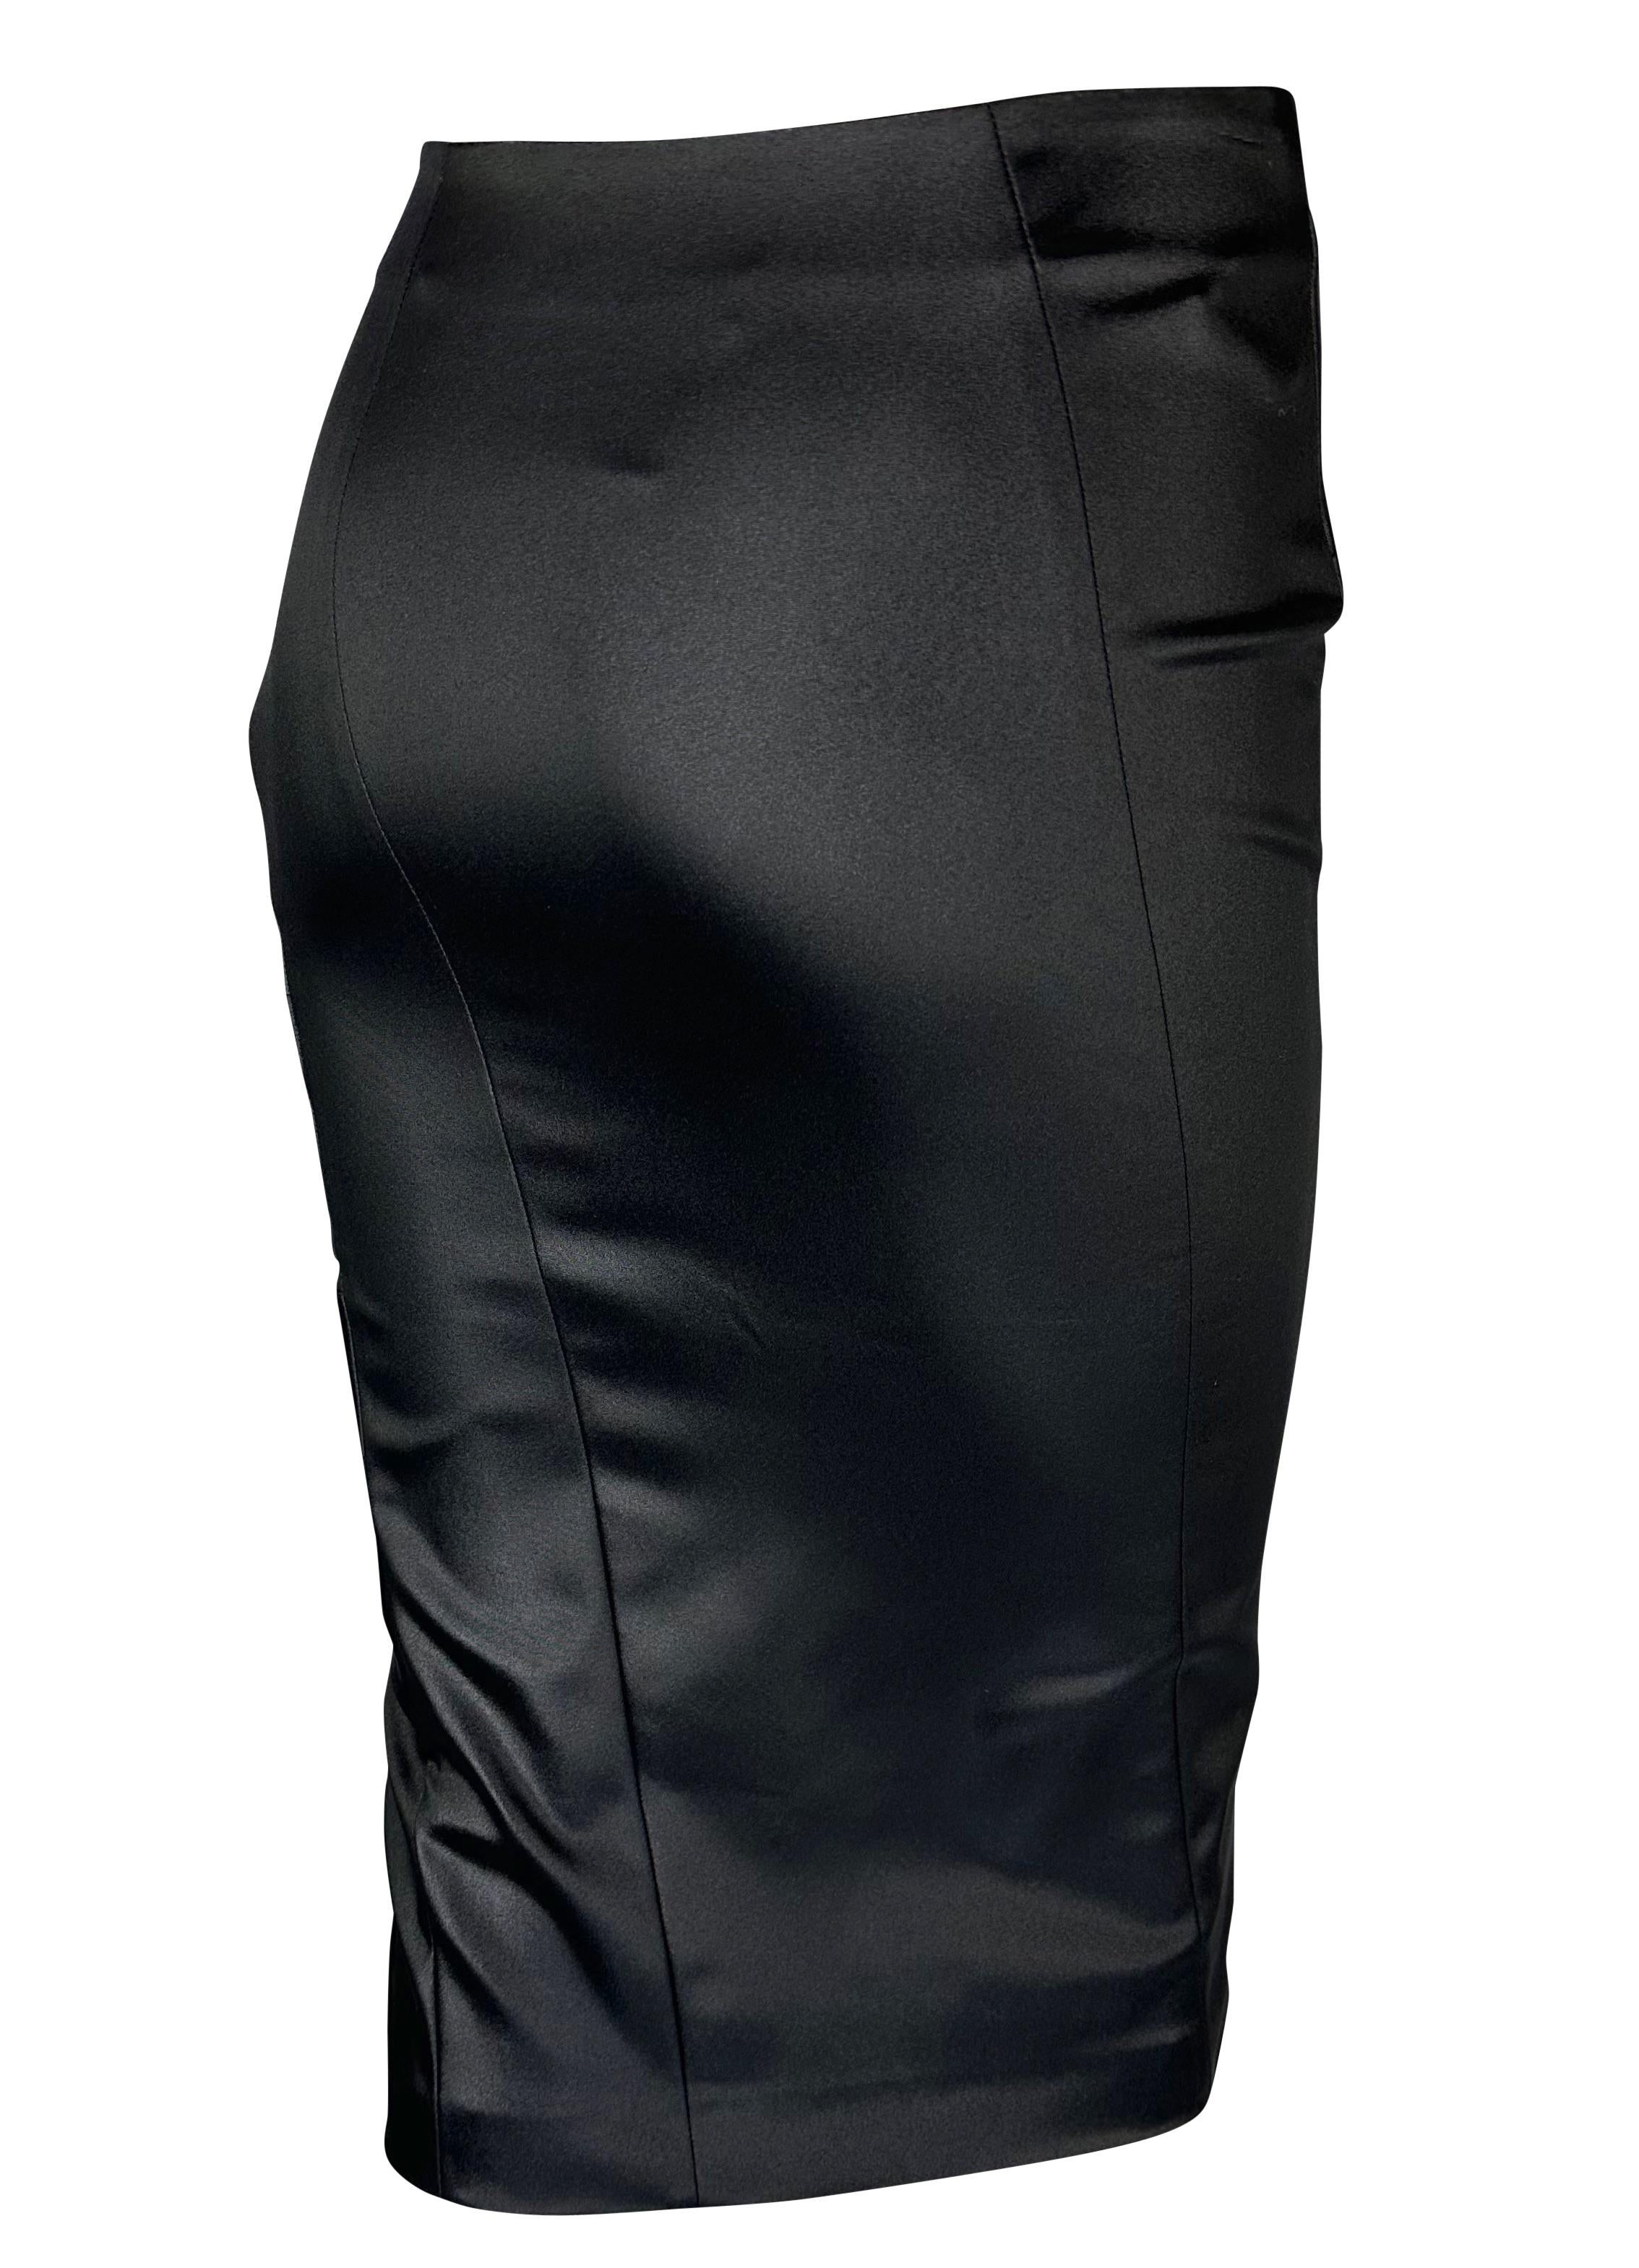 F/W 2003 Christian Dior by John Galliano Tie Accent Bodycon Stretch Skirt For Sale 2